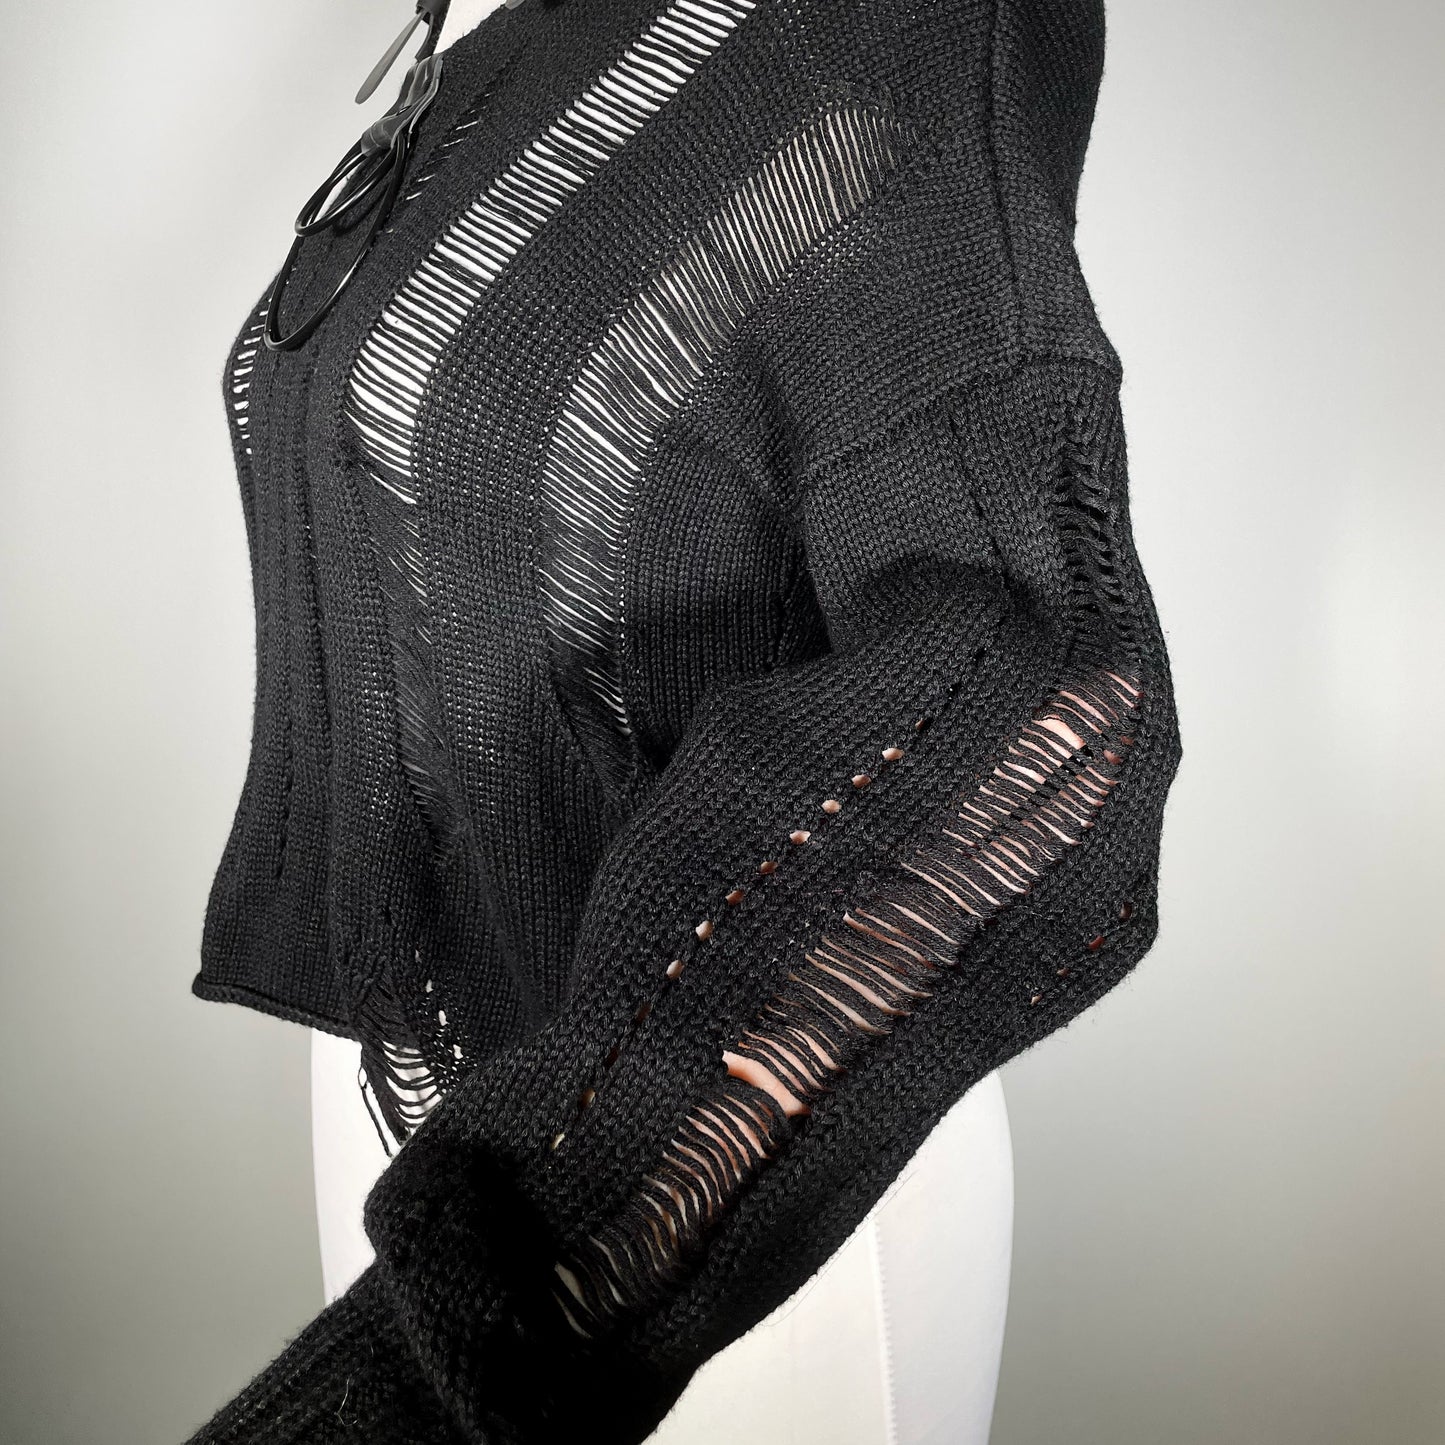 Black Distressed Sweater with Black Rubber and Black Hardware Accents